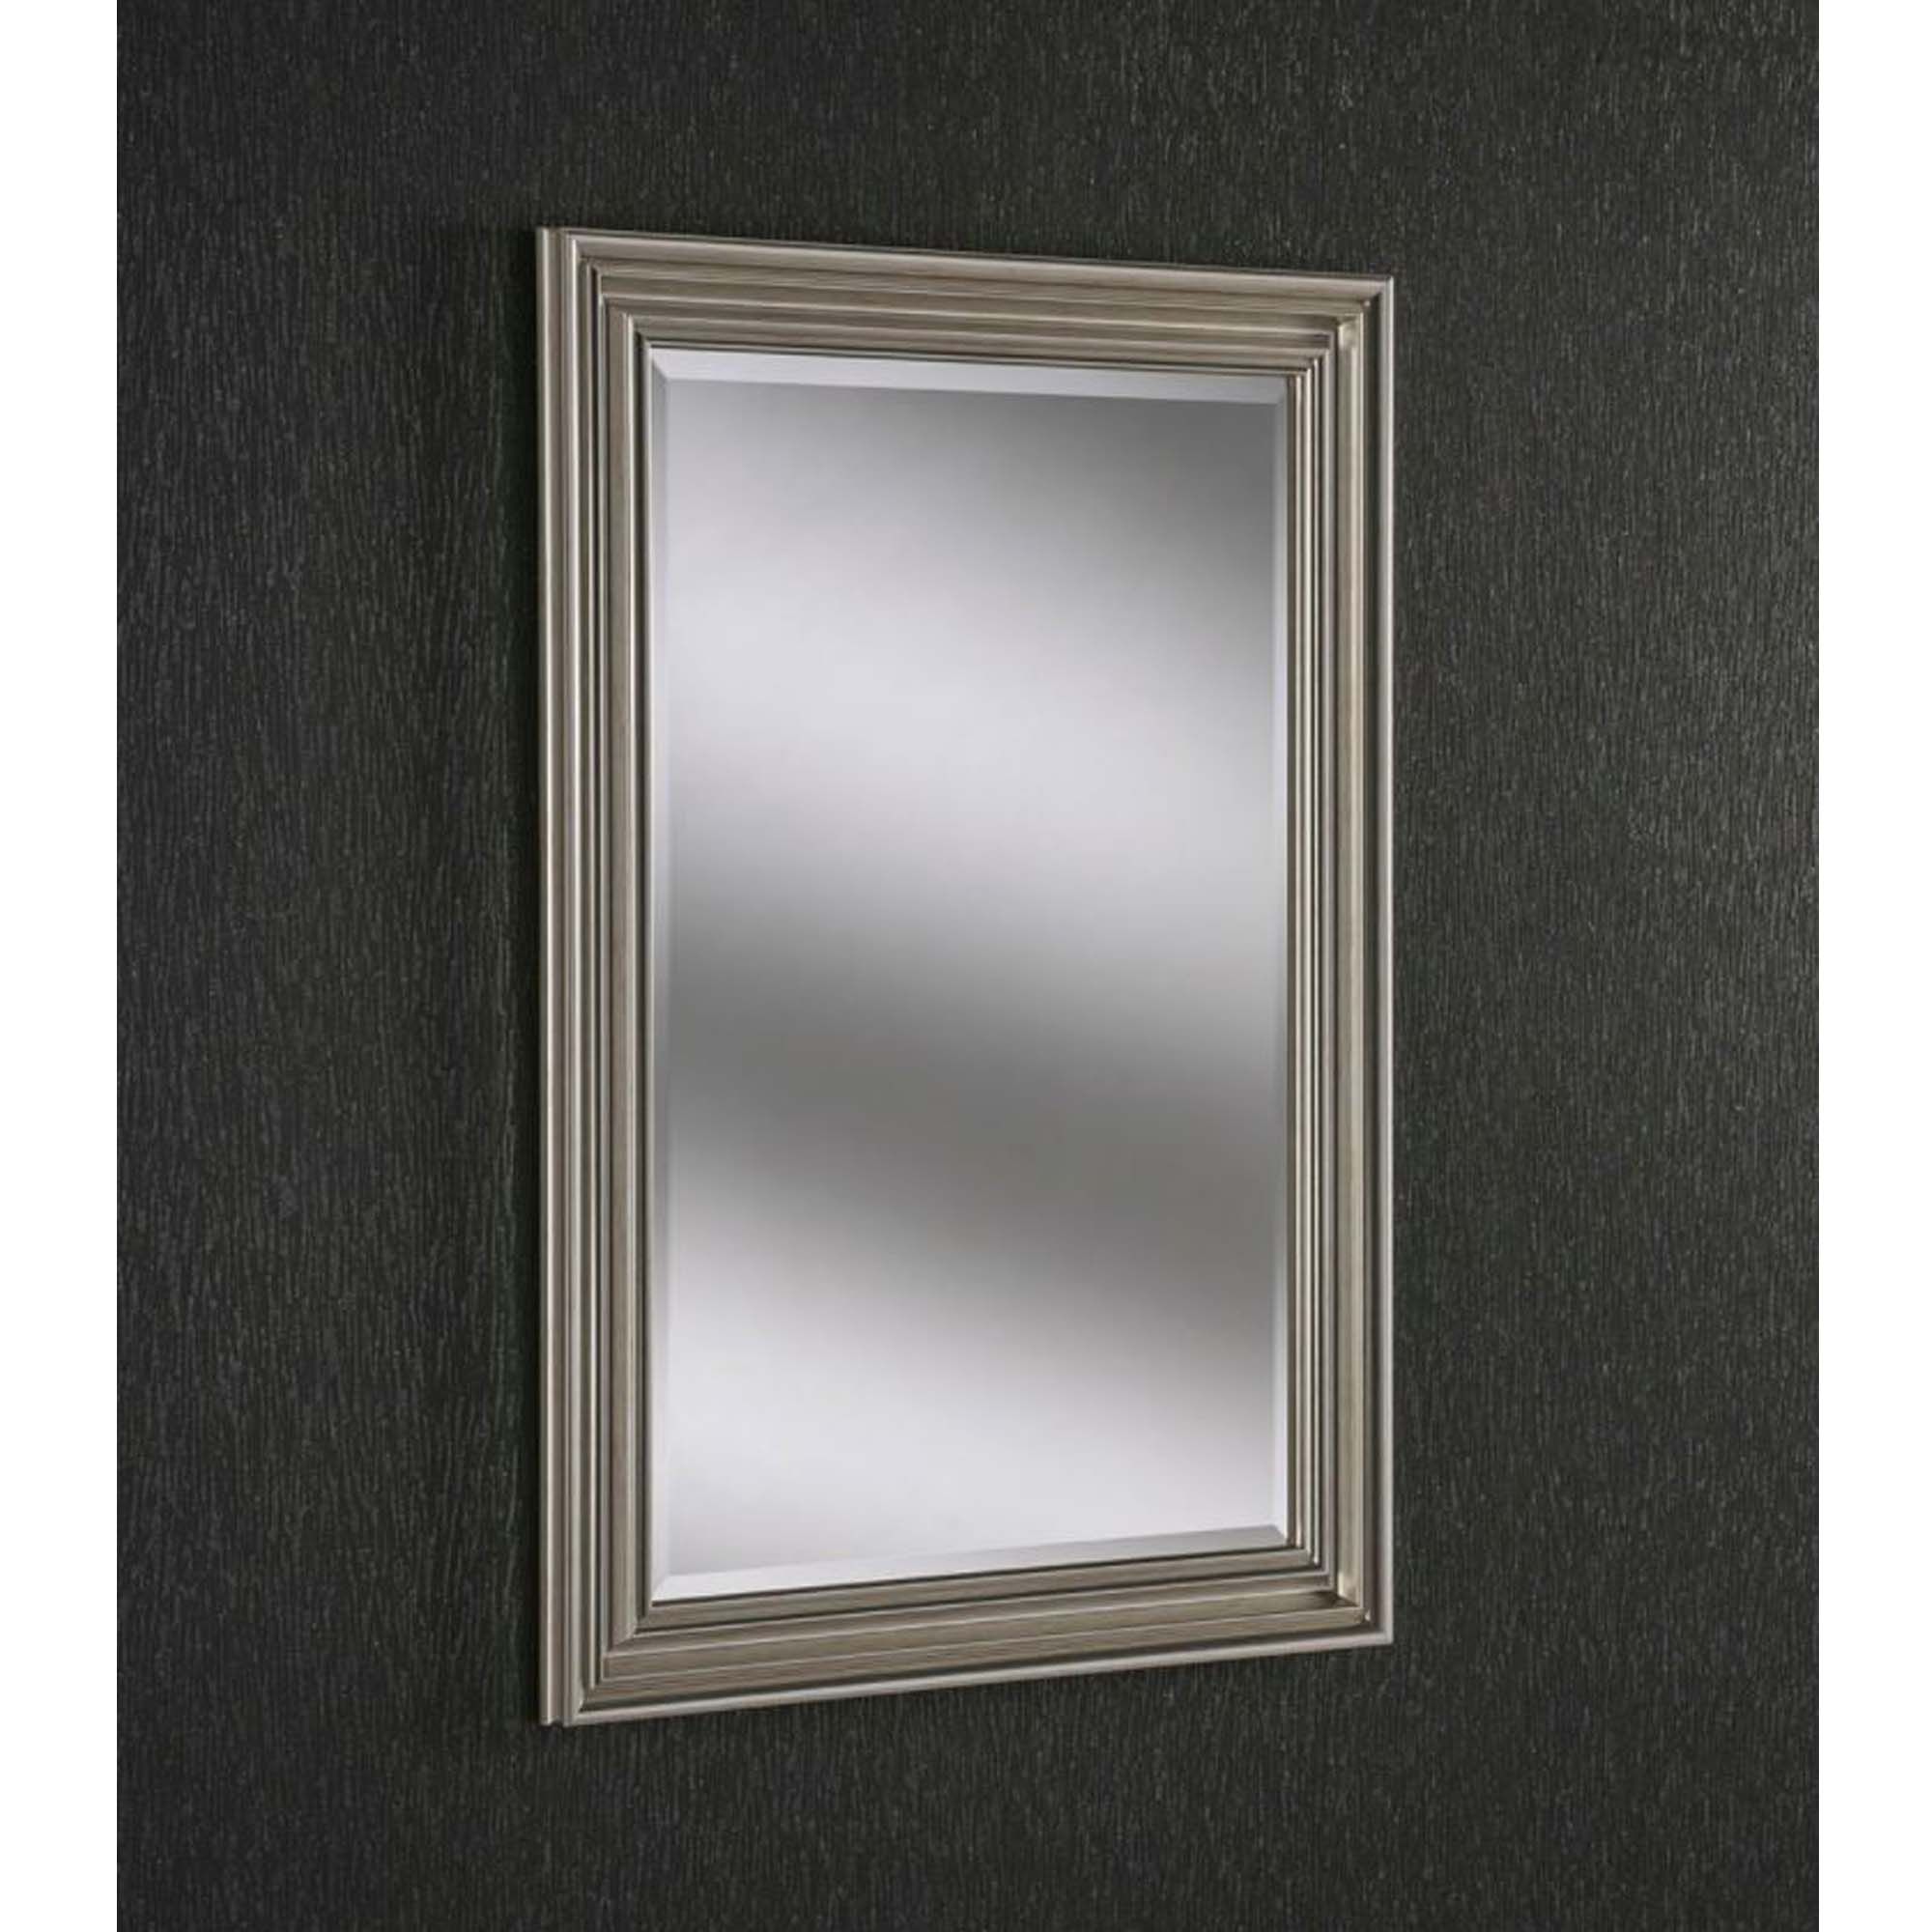 Multi Bevel Silver Wall Mirror | Decor | Homesdirect365 Throughout Silver High Wall Mirrors (View 7 of 15)